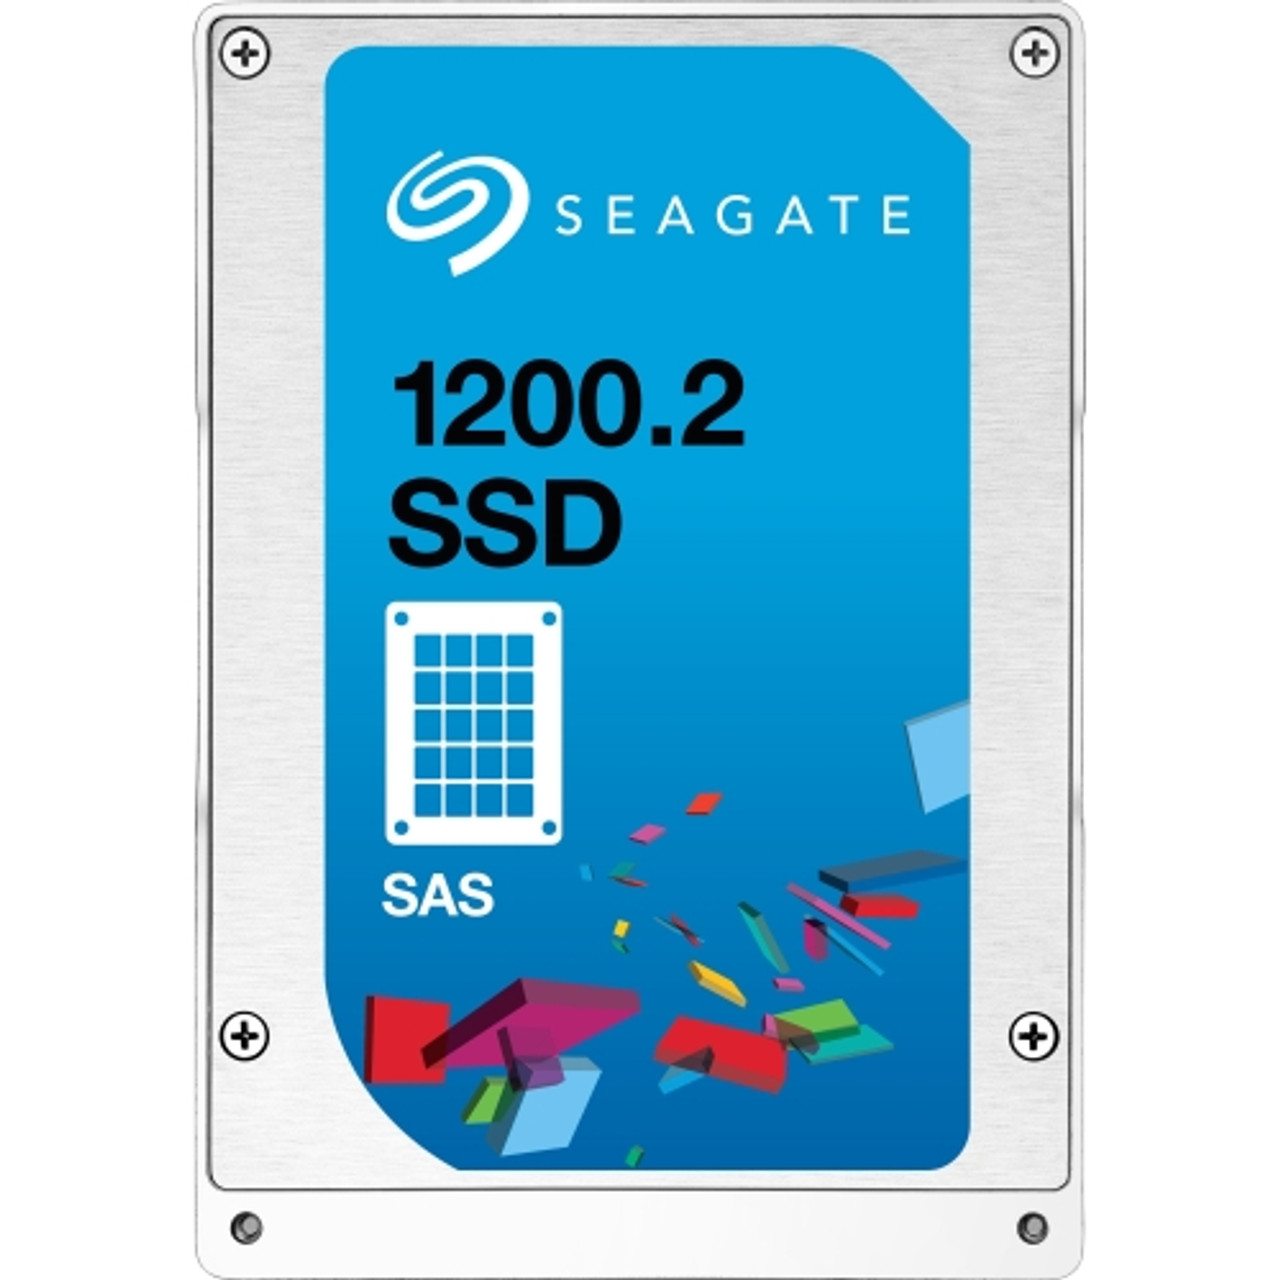 ST3200FM0043-5PK Seagate 1200.2 Series 3.2TB eMLC SAS 12Gbps Dual Port Mainstream Endurance (FIPS 140-2) 2.5-inch Internal Solid State Drive (SSD) (5-Pack)